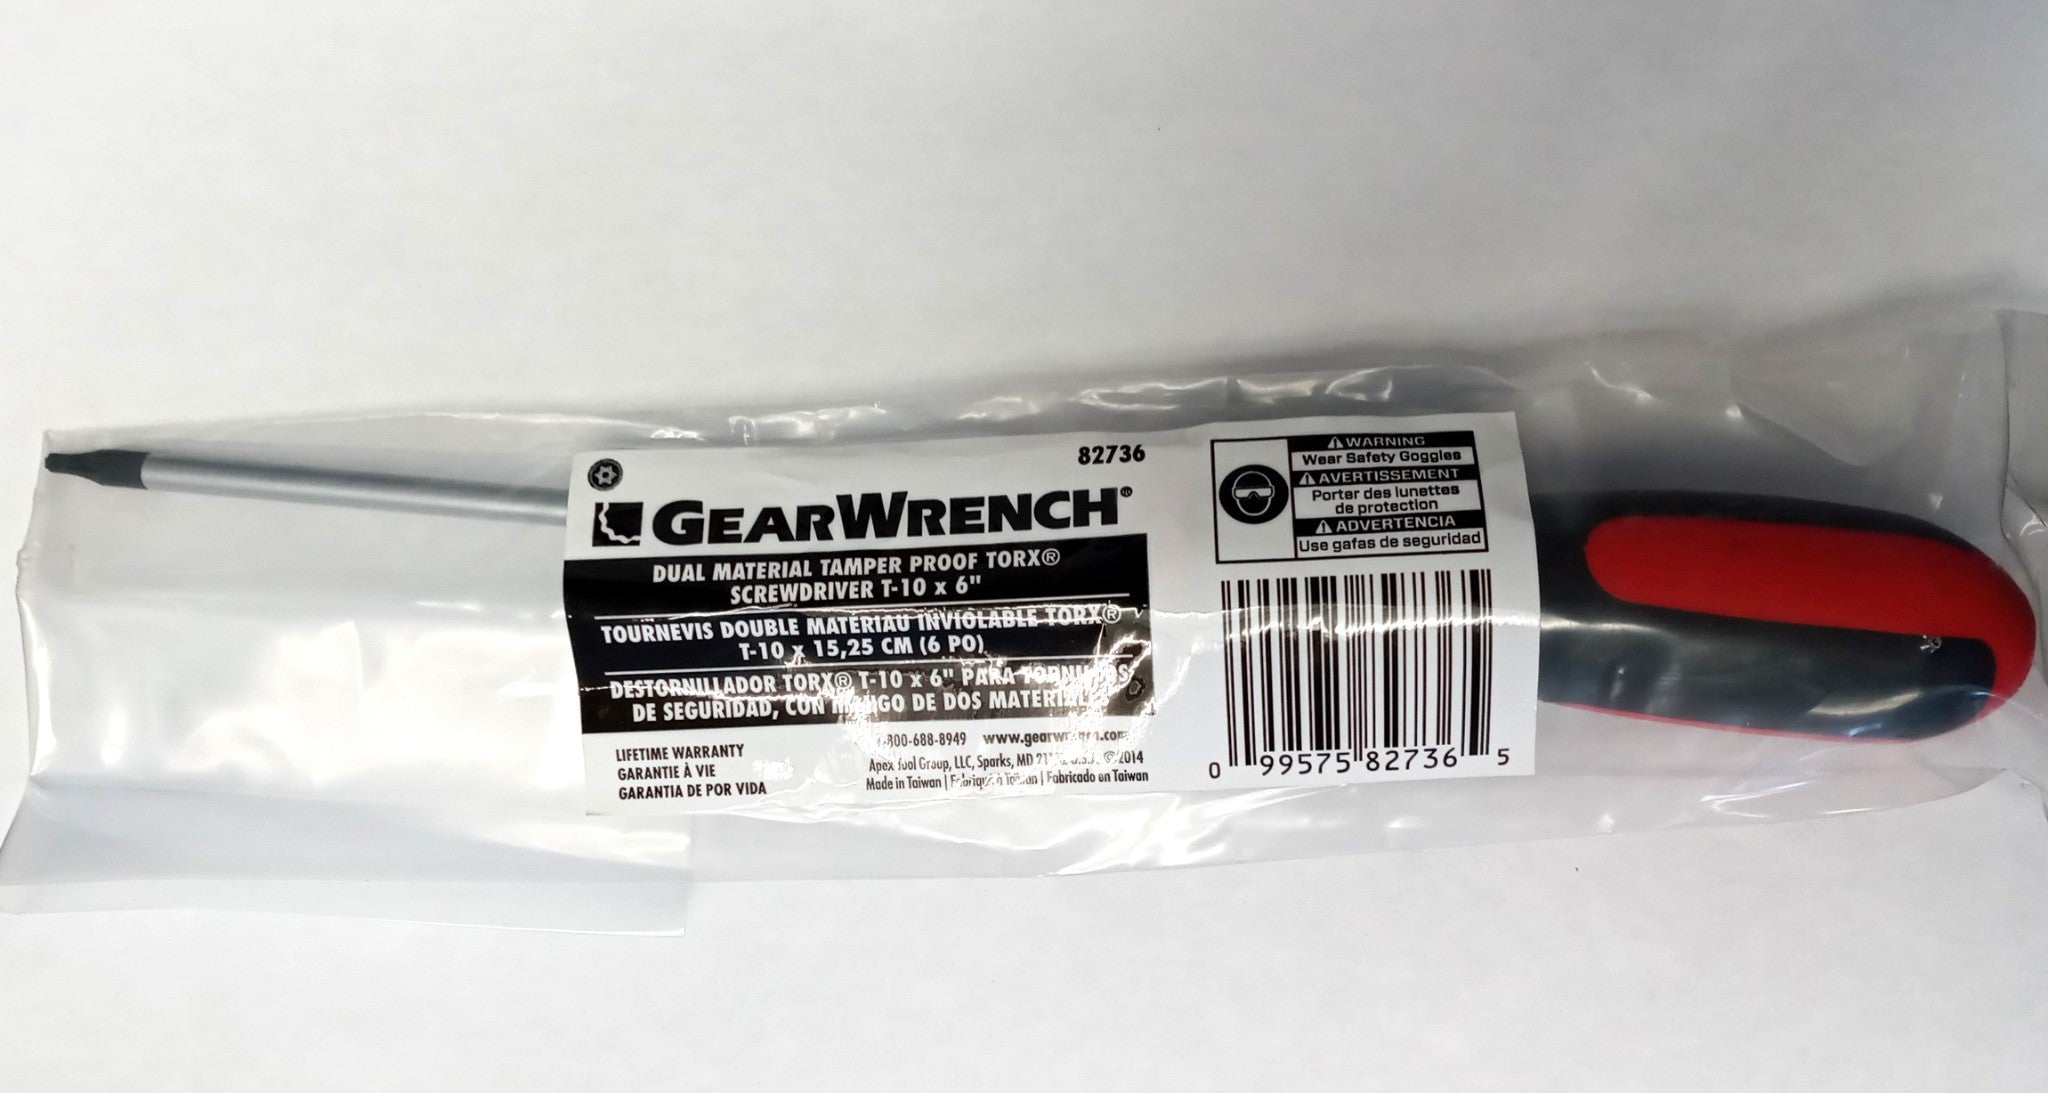 GearWrench 82736 T10 x 6" Tamper Proof Torx Dual Material Screwdriver